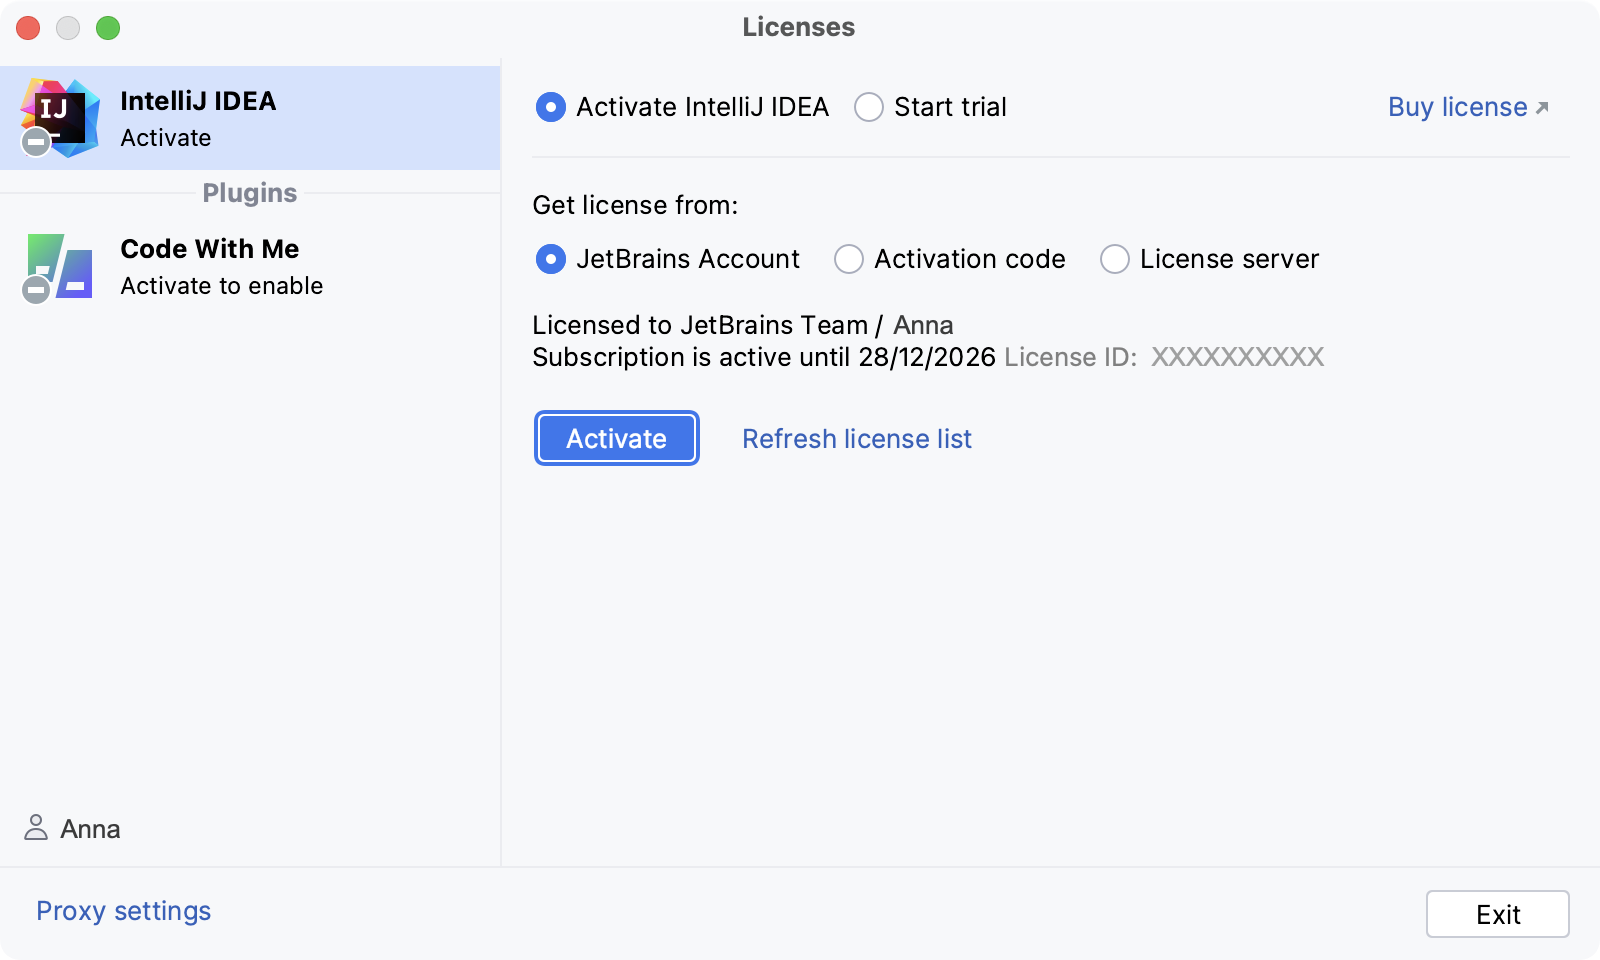 Activate IntelliJ IDEA license with a JetBrains Account